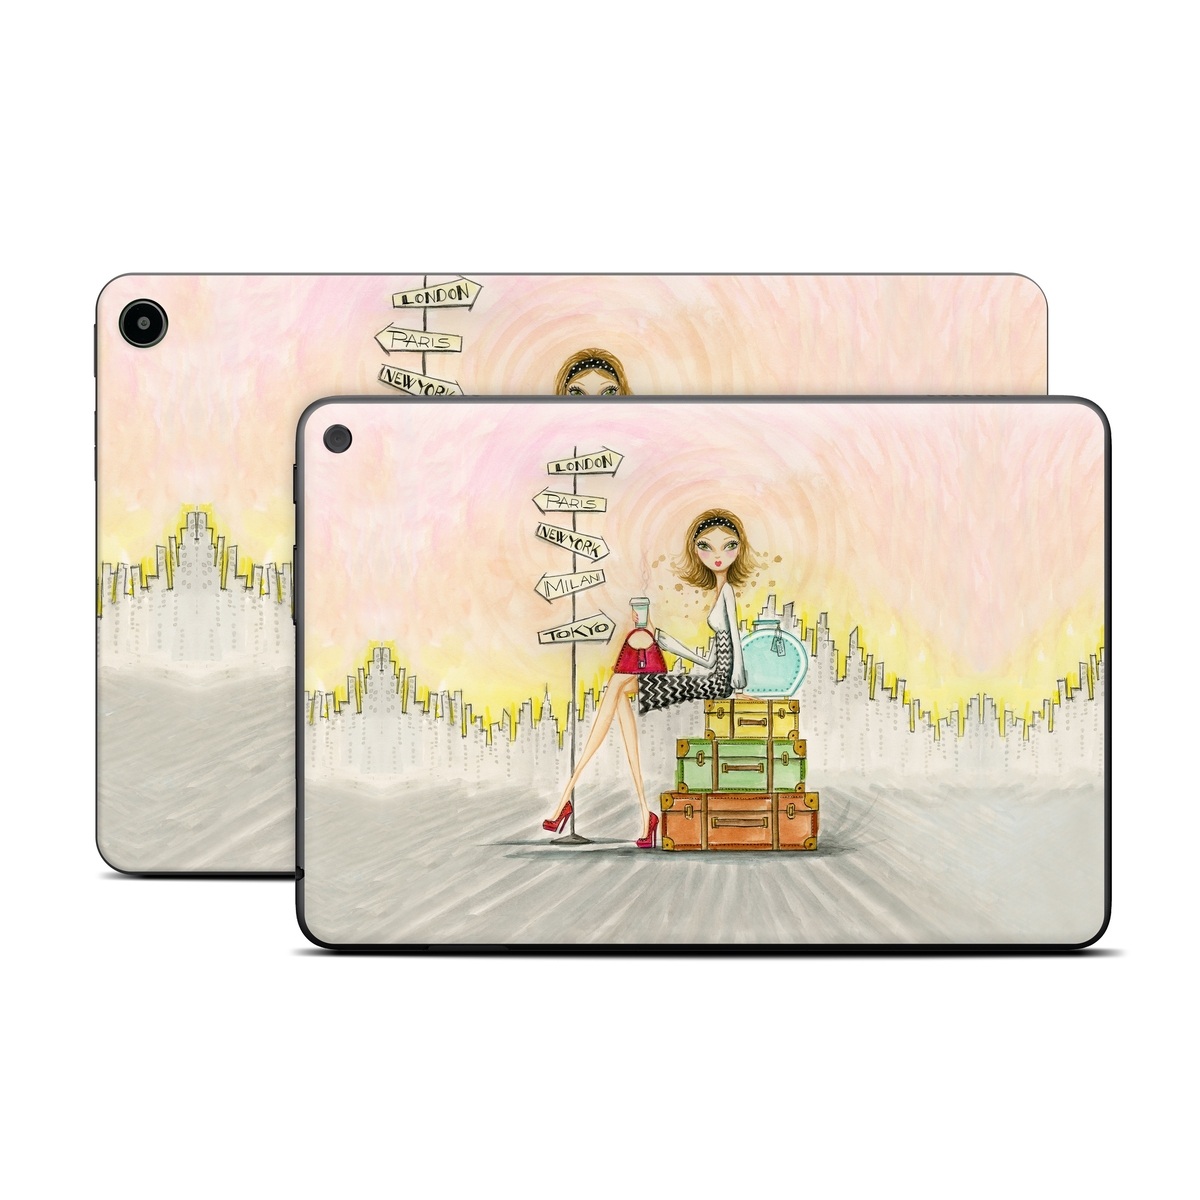 Amazon Fire Tablet Series Skin Skin design of Cartoon, Illustration, Art, Watercolor paint, with gray, pink, green, red, black colors